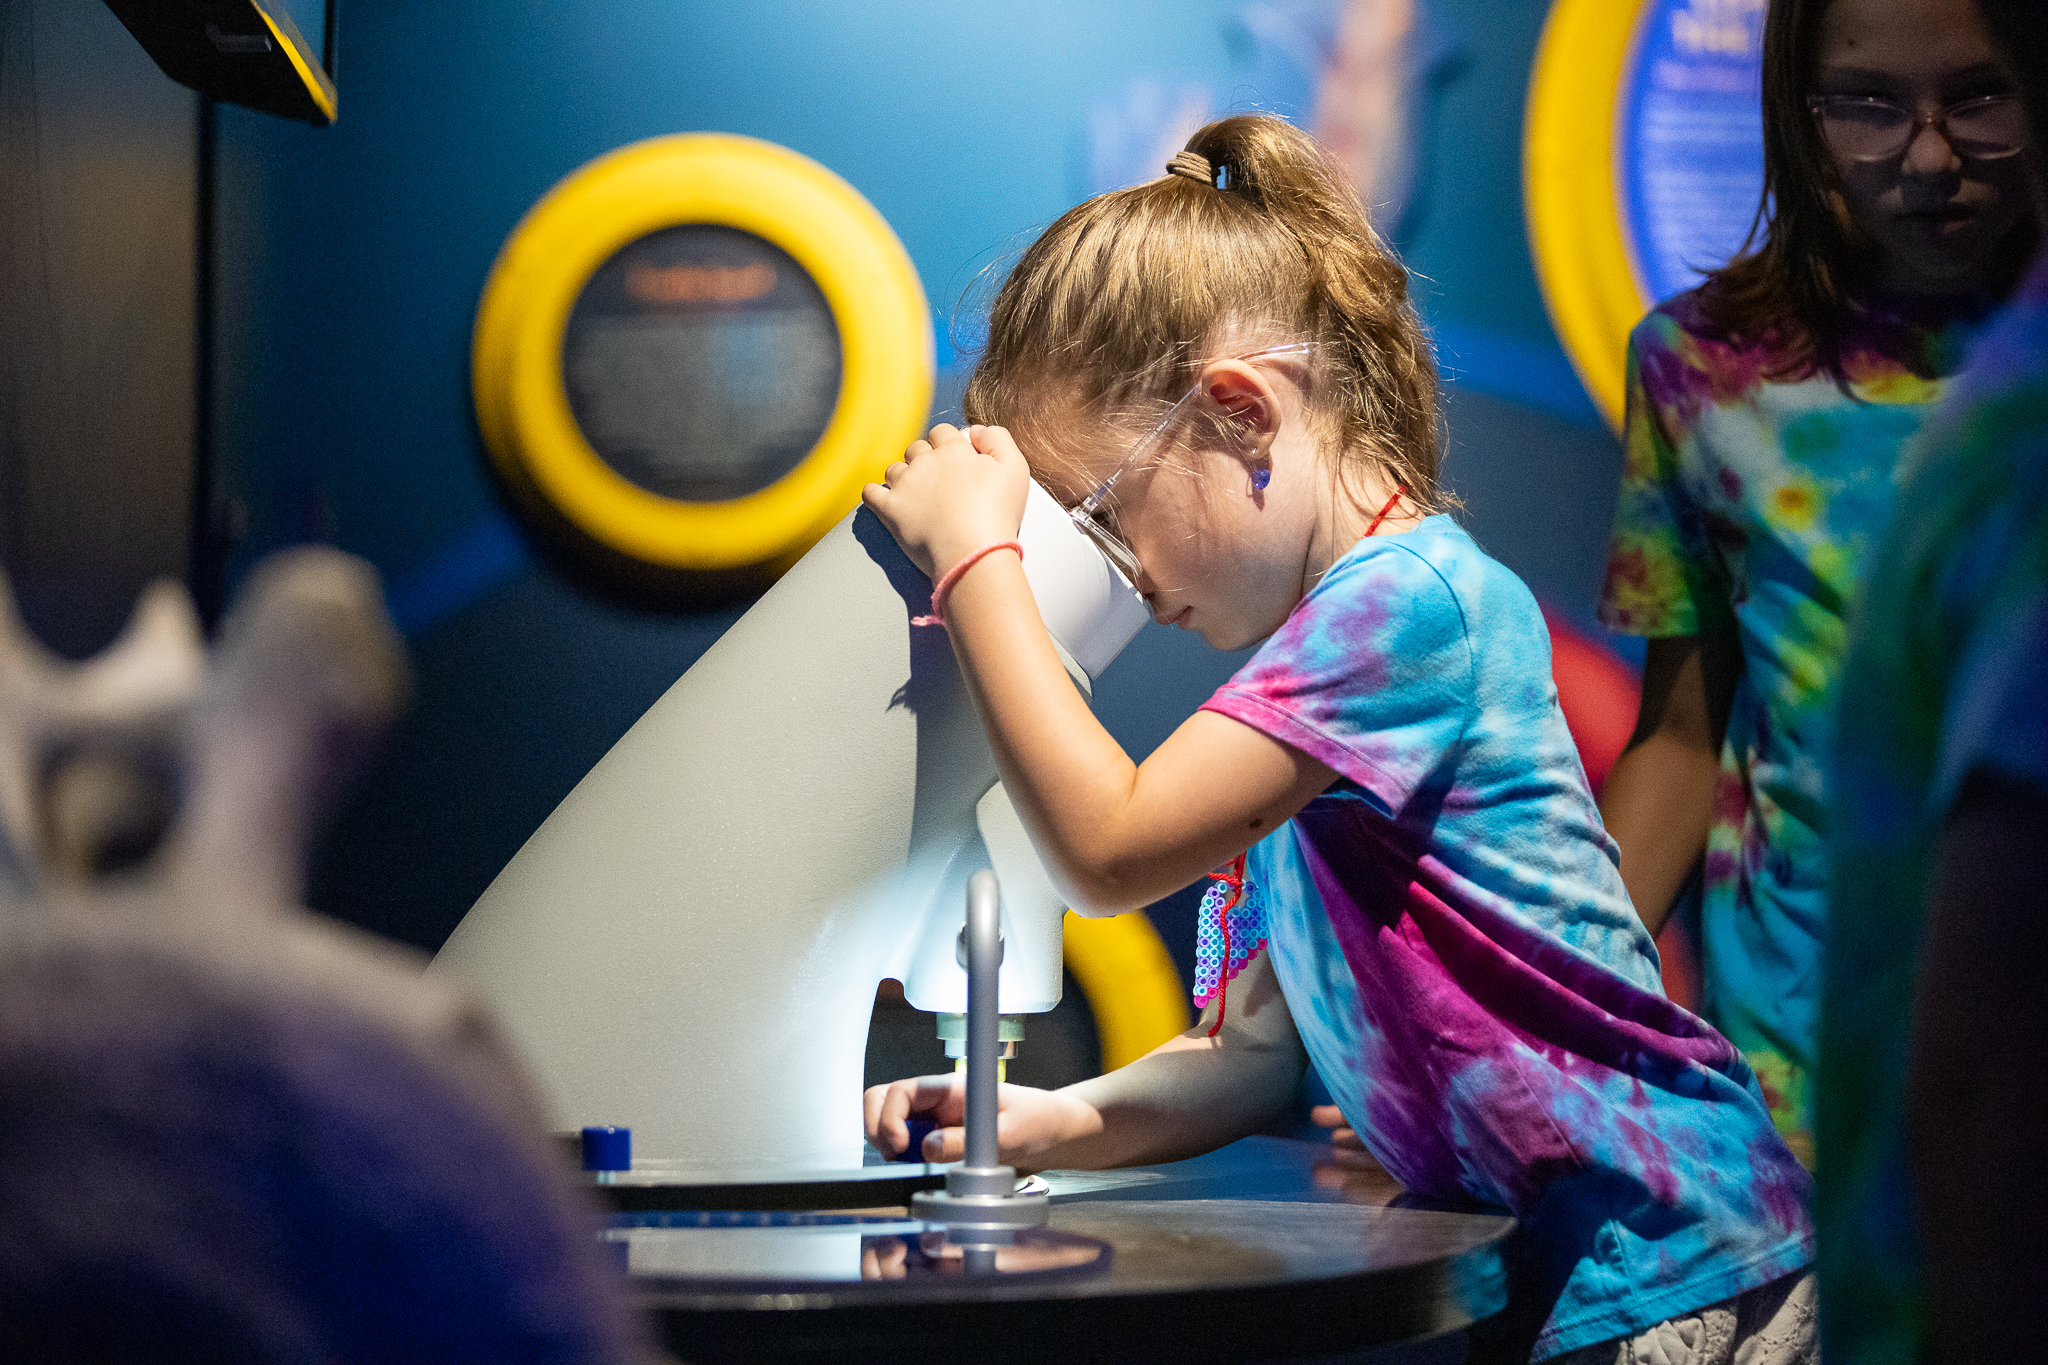 A little girl with glasses and a tie-dye shirt looks through a microscope